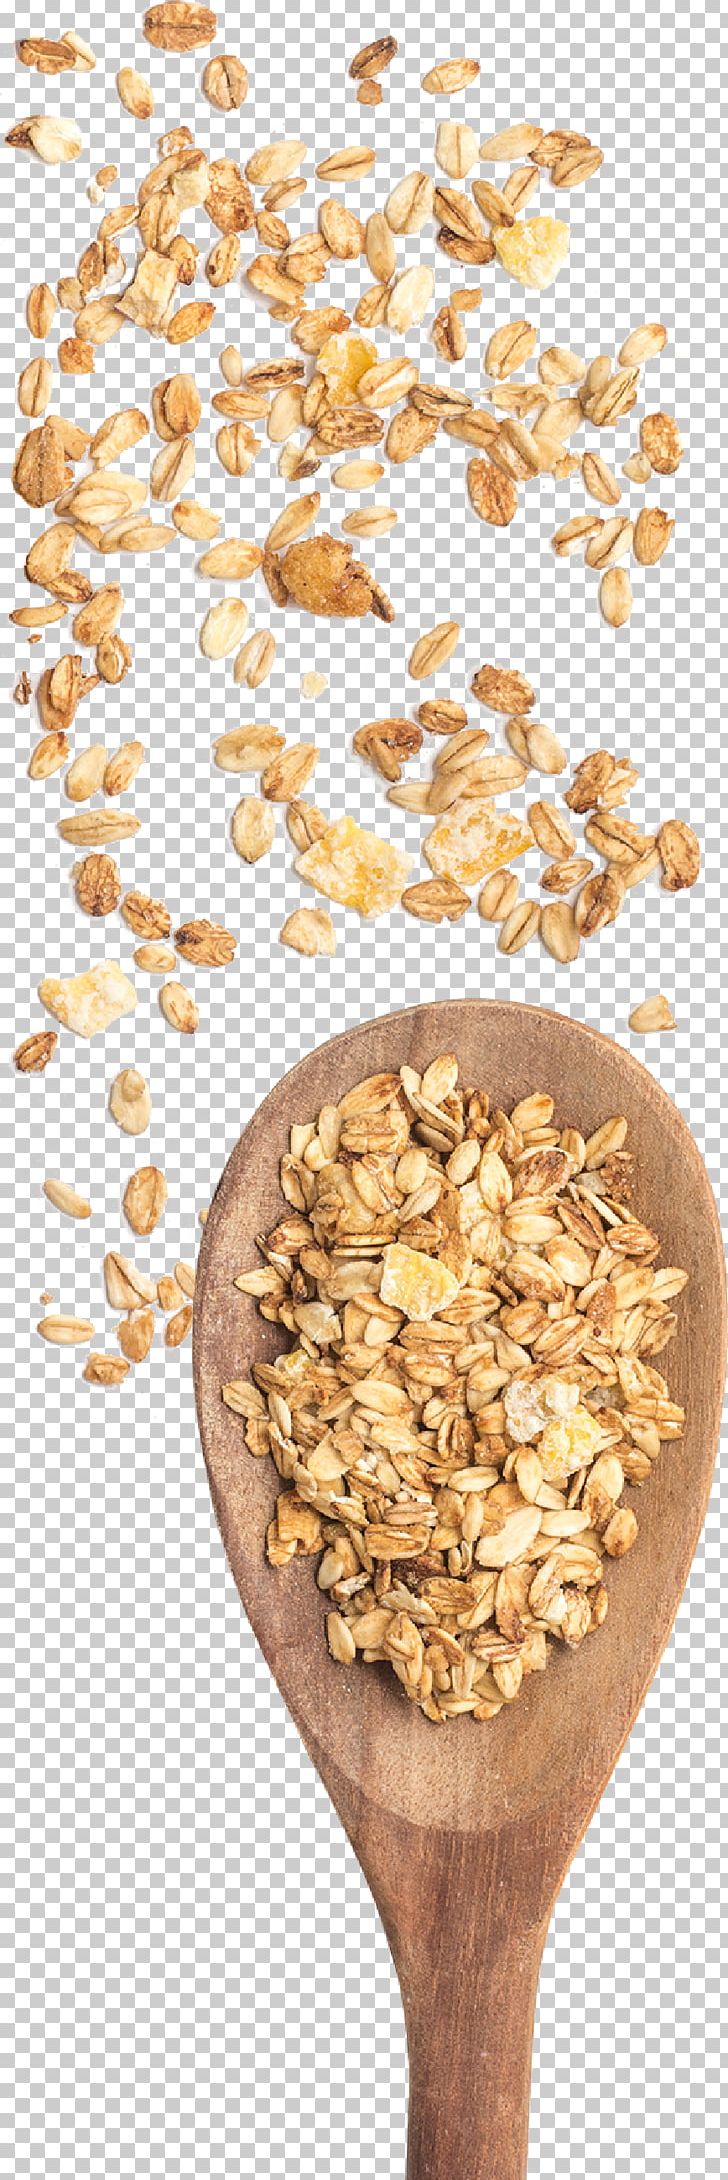 Breakfast Cereal Cereal Germ Whole Grain Oat PNG, Clipart, Breakfast, Breakfast Cereal, Cereal, Cereal Germ, Commodity Free PNG Download